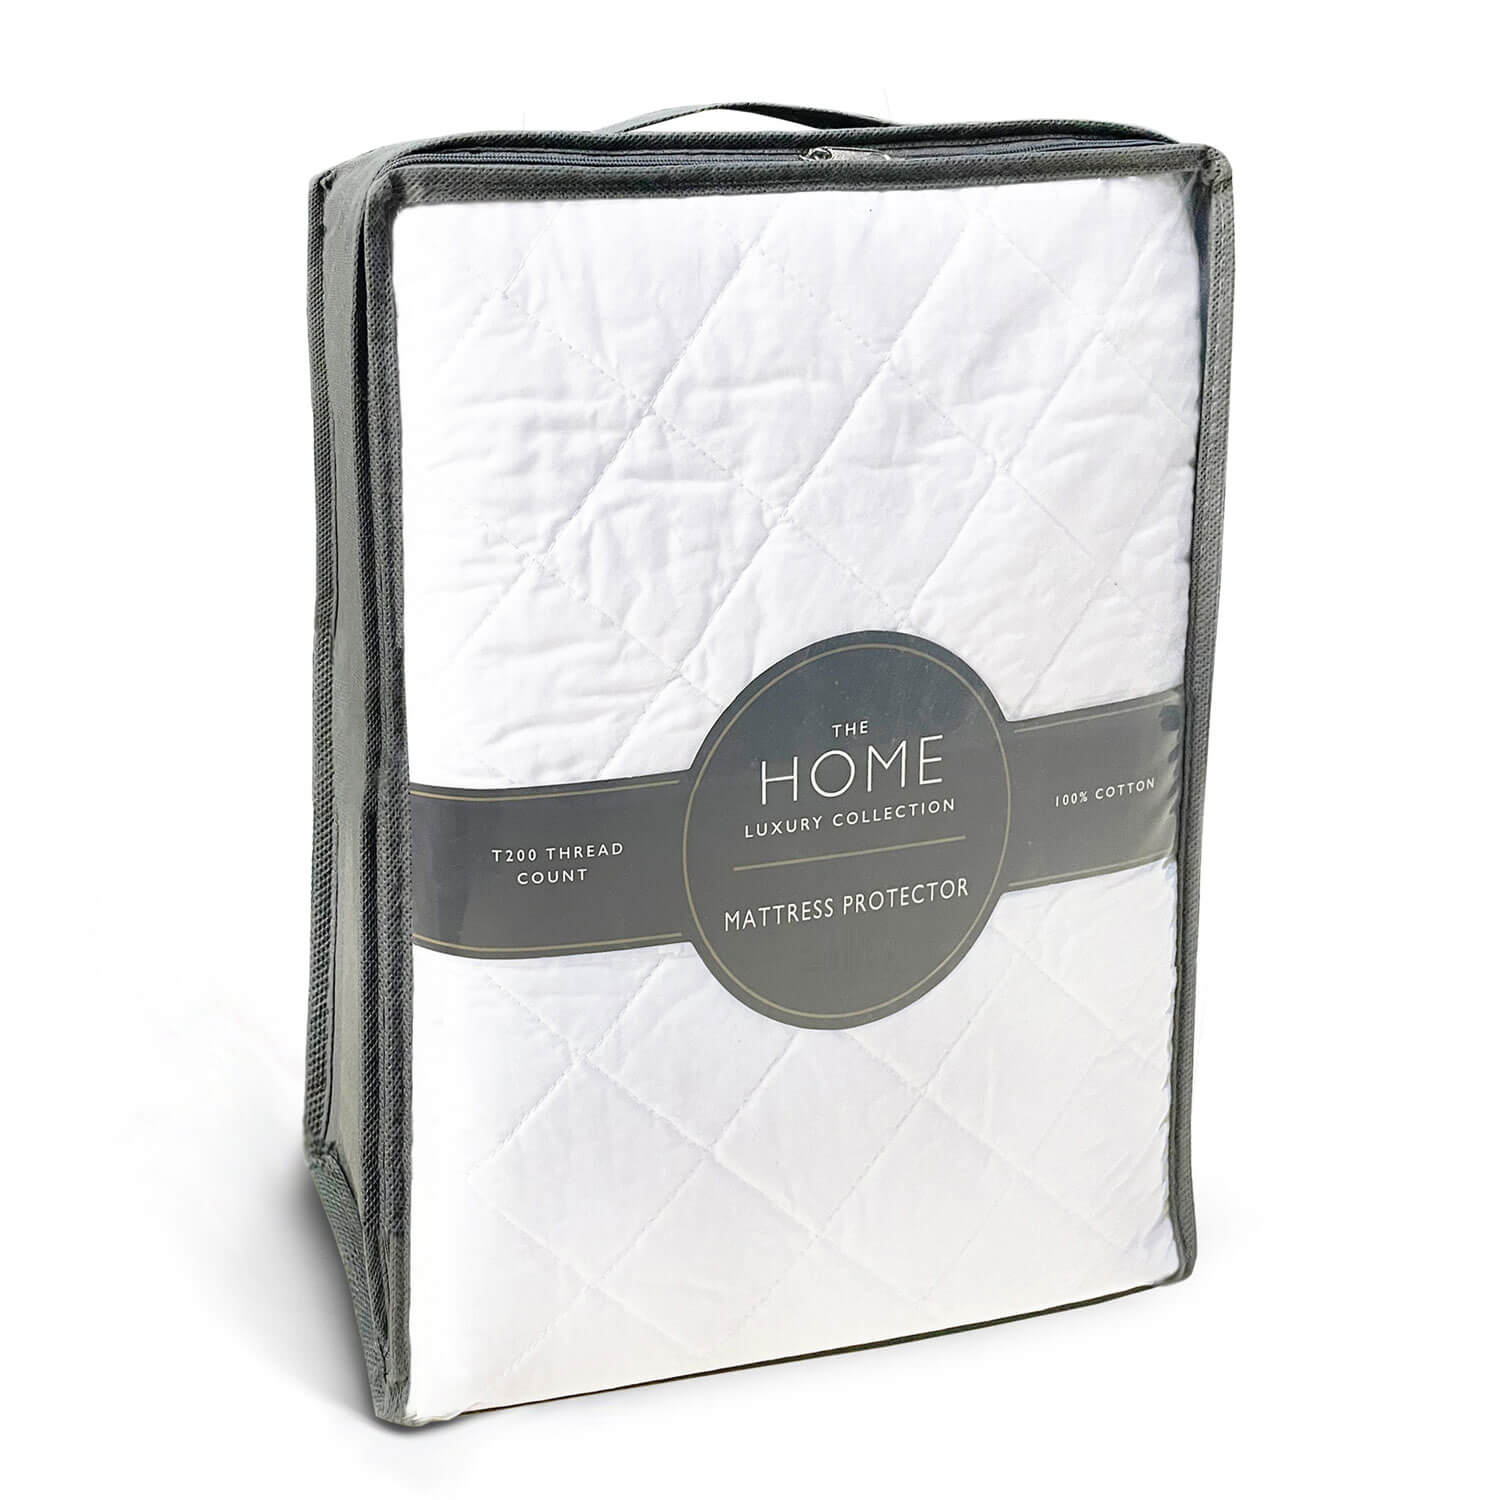 The Home Luxury Collection All Cotton Mattress Protector Super King - White 1 Shaws Department Stores